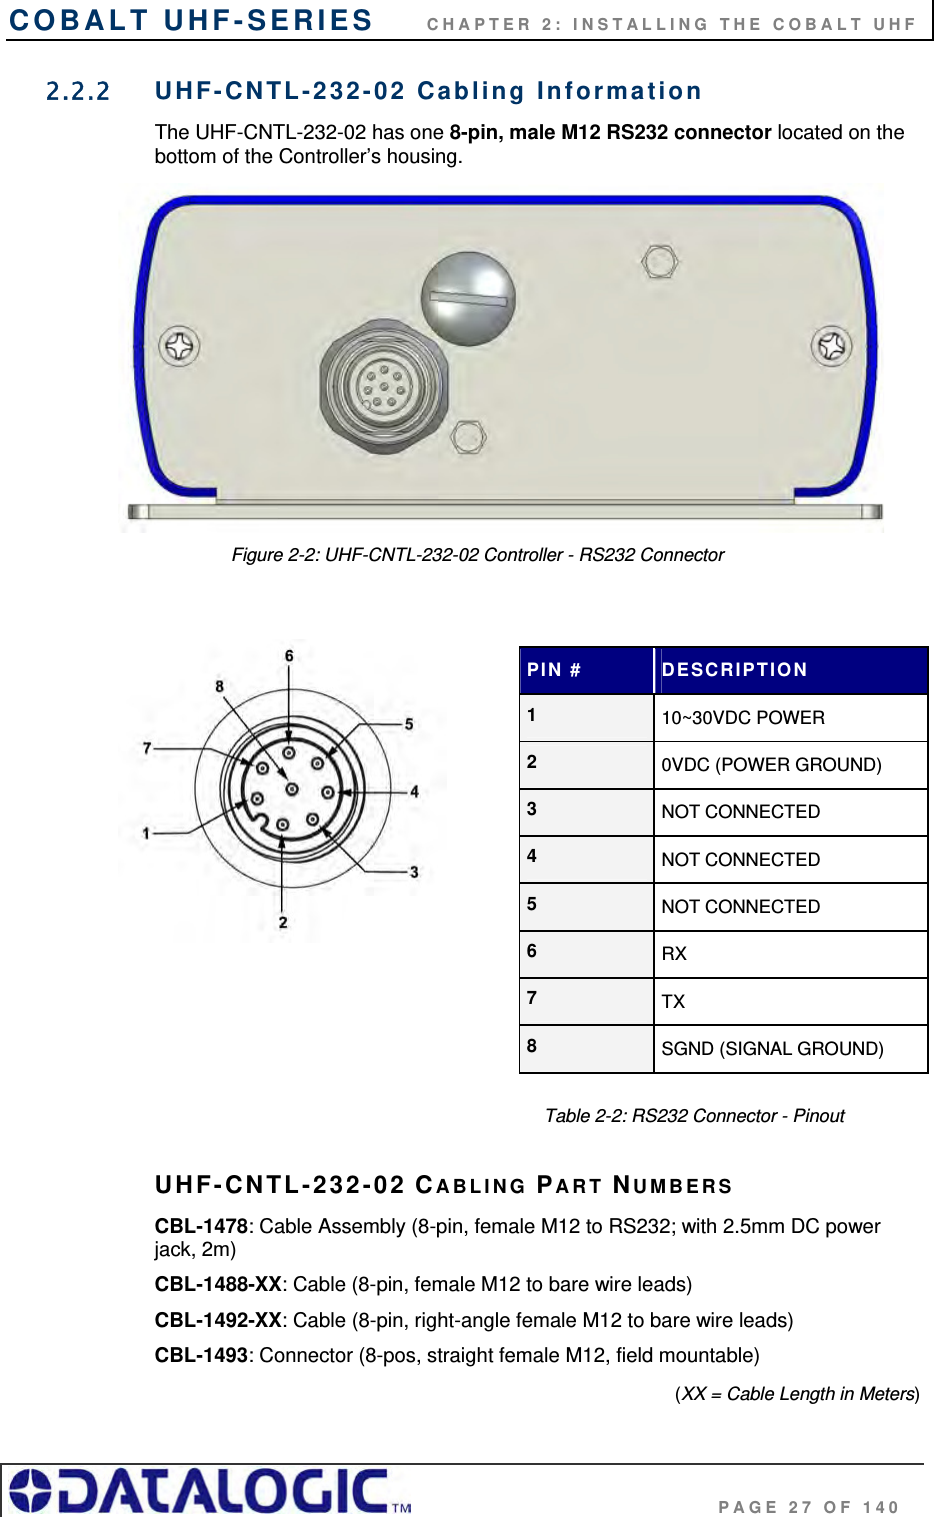 COBALT UHF-SERIES      CHAPTER 2: INSTALLING THE COBALT UHF                                     PAGE 27 OF 140 2.2.2  UHF-CNTL-232-02 Cabling Information The UHF-CNTL-232-02 has one 8-pin, male M12 RS232 connector located on the bottom of the Controller’s housing.                 Figure 2-2: UHF-CNTL-232-02 Controller - RS232 Connector                                                                         Table 2-2: RS232 Connector - Pinout  UHF-CNTL-232-02 CABLING PART NUMBERS CBL-1478: Cable Assembly (8-pin, female M12 to RS232; with 2.5mm DC power     jack, 2m) CBL-1488-XX: Cable (8-pin, female M12 to bare wire leads) CBL-1492-XX: Cable (8-pin, right-angle female M12 to bare wire leads) CBL-1493: Connector (8-pos, straight female M12, field mountable)  (XX = Cable Length in Meters) PIN #  DESCRIPTION 1  10~30VDC POWER 2  0VDC (POWER GROUND) 3  NOT CONNECTED 4  NOT CONNECTED 5  NOT CONNECTED 6  RX 7  TX 8  SGND (SIGNAL GROUND) 